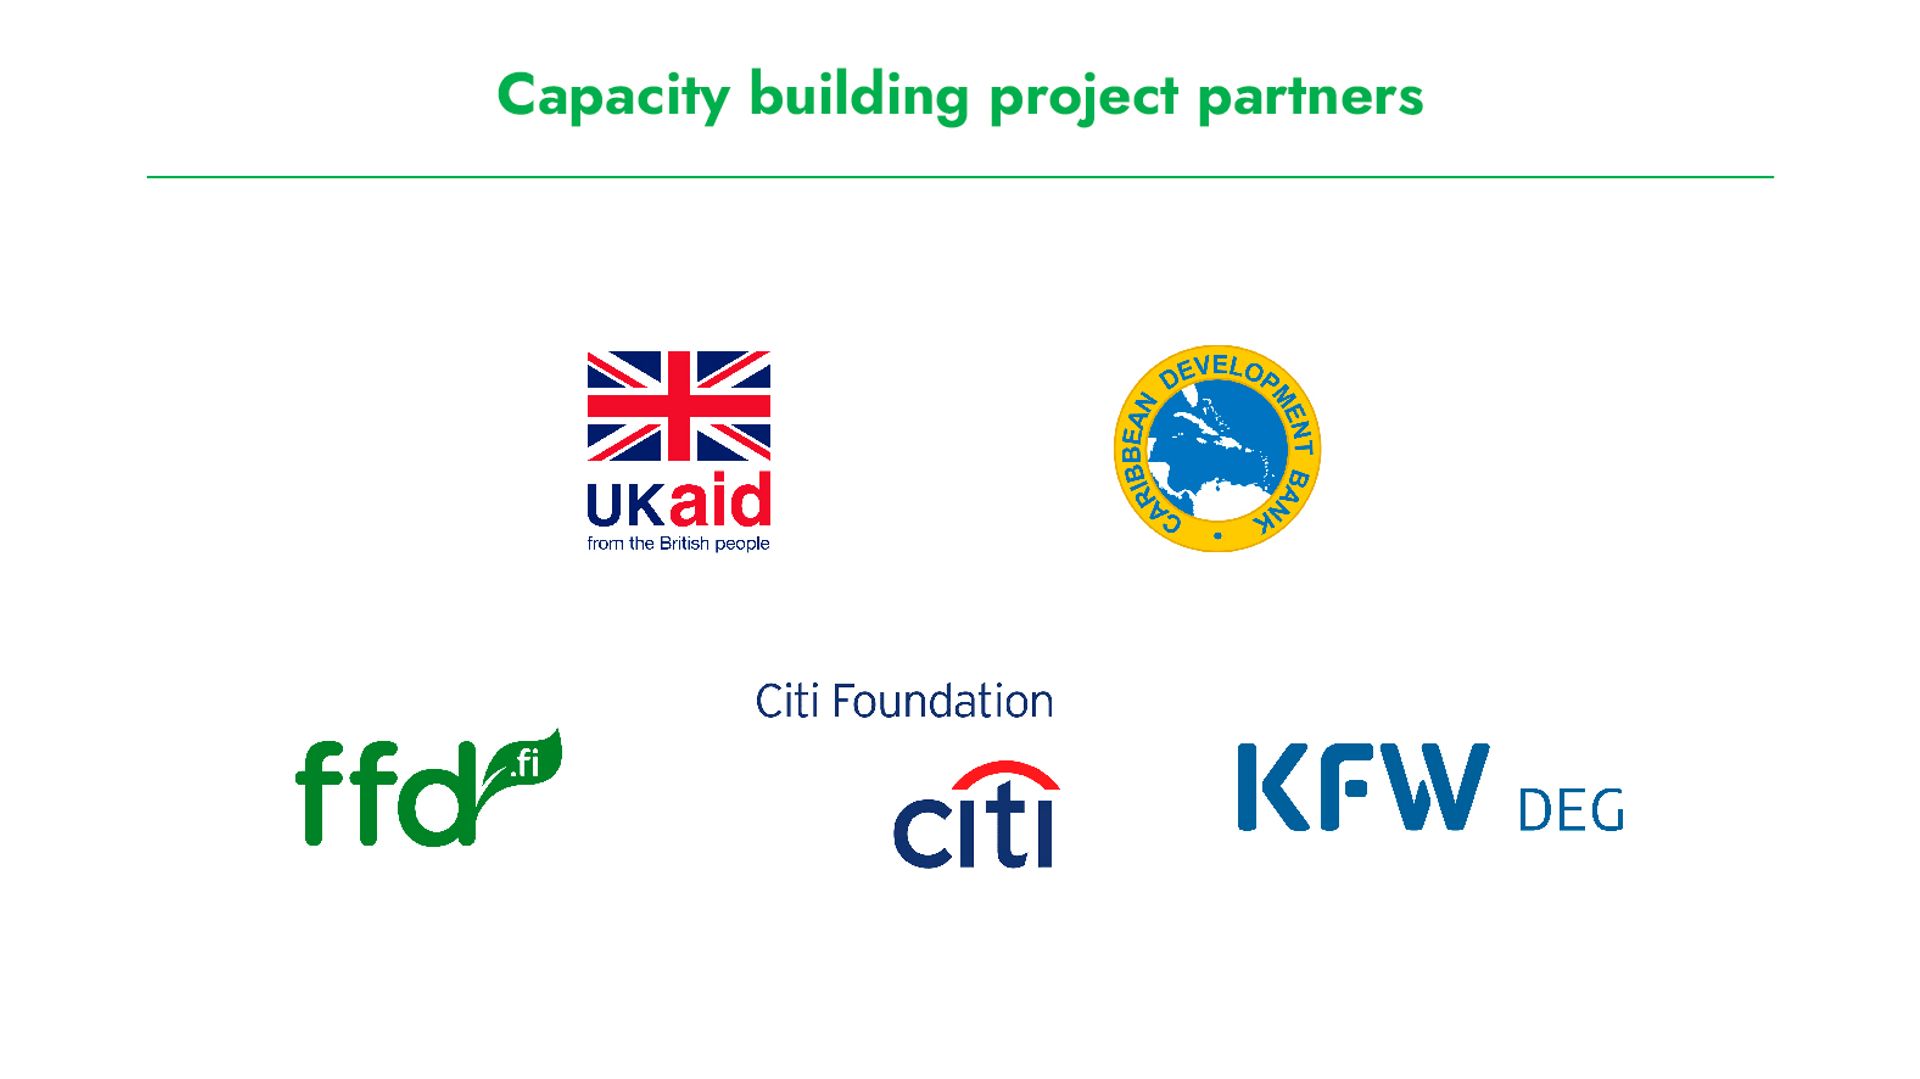 Infographic showing selected GLOBALG.A.P. capacity building project partners